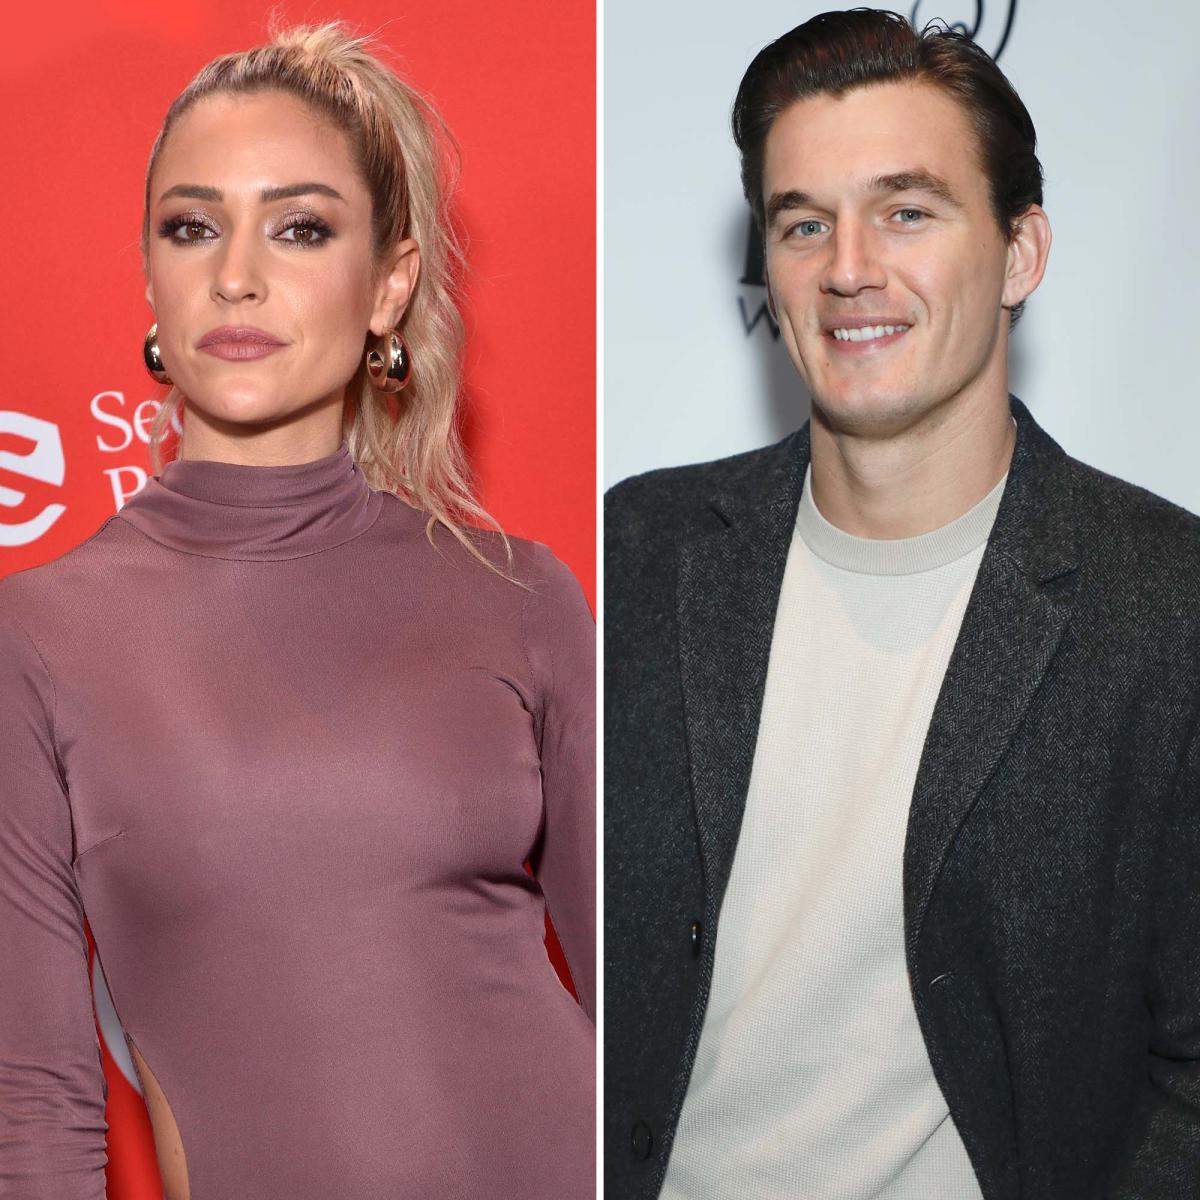 Kristin Cavallari Plays Into Tyler Cameron Speculation After PDA Photo Shoot: What We Know